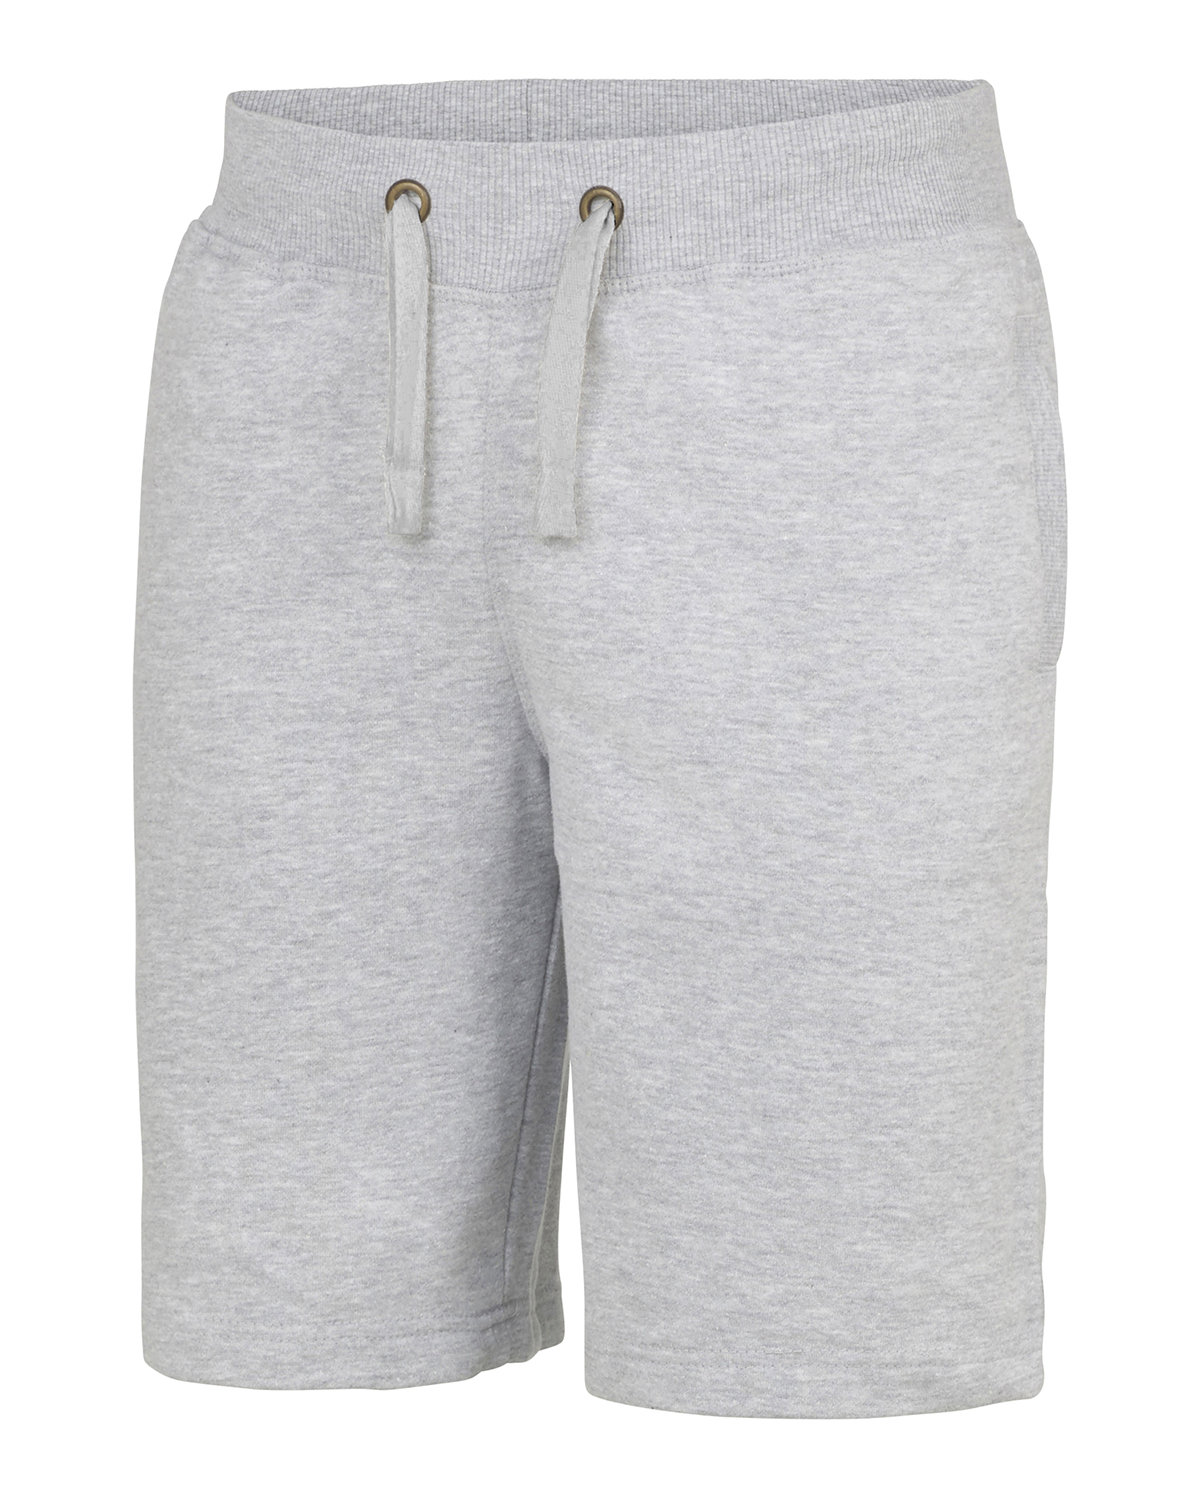 Mens Campus Short-Just Hoods By AWDis